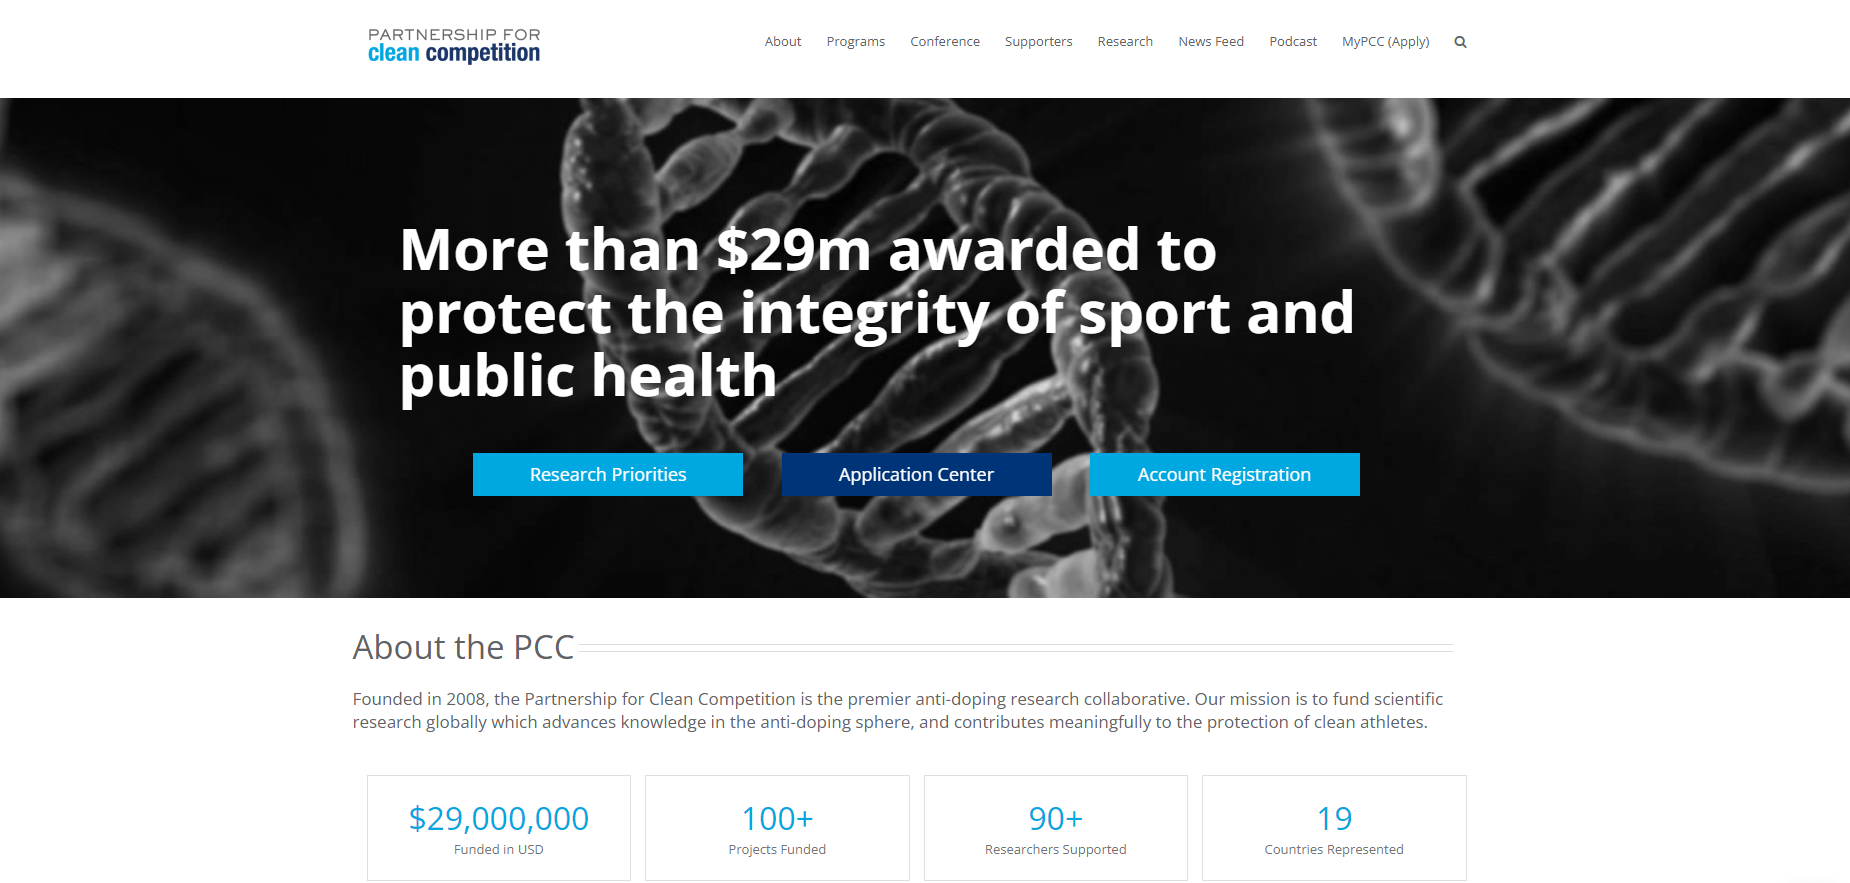 The Partnership for Clean Competition claims to  promote the integrity and fairness of sport by funding the majority of the world’s anti-doping research.©PCC